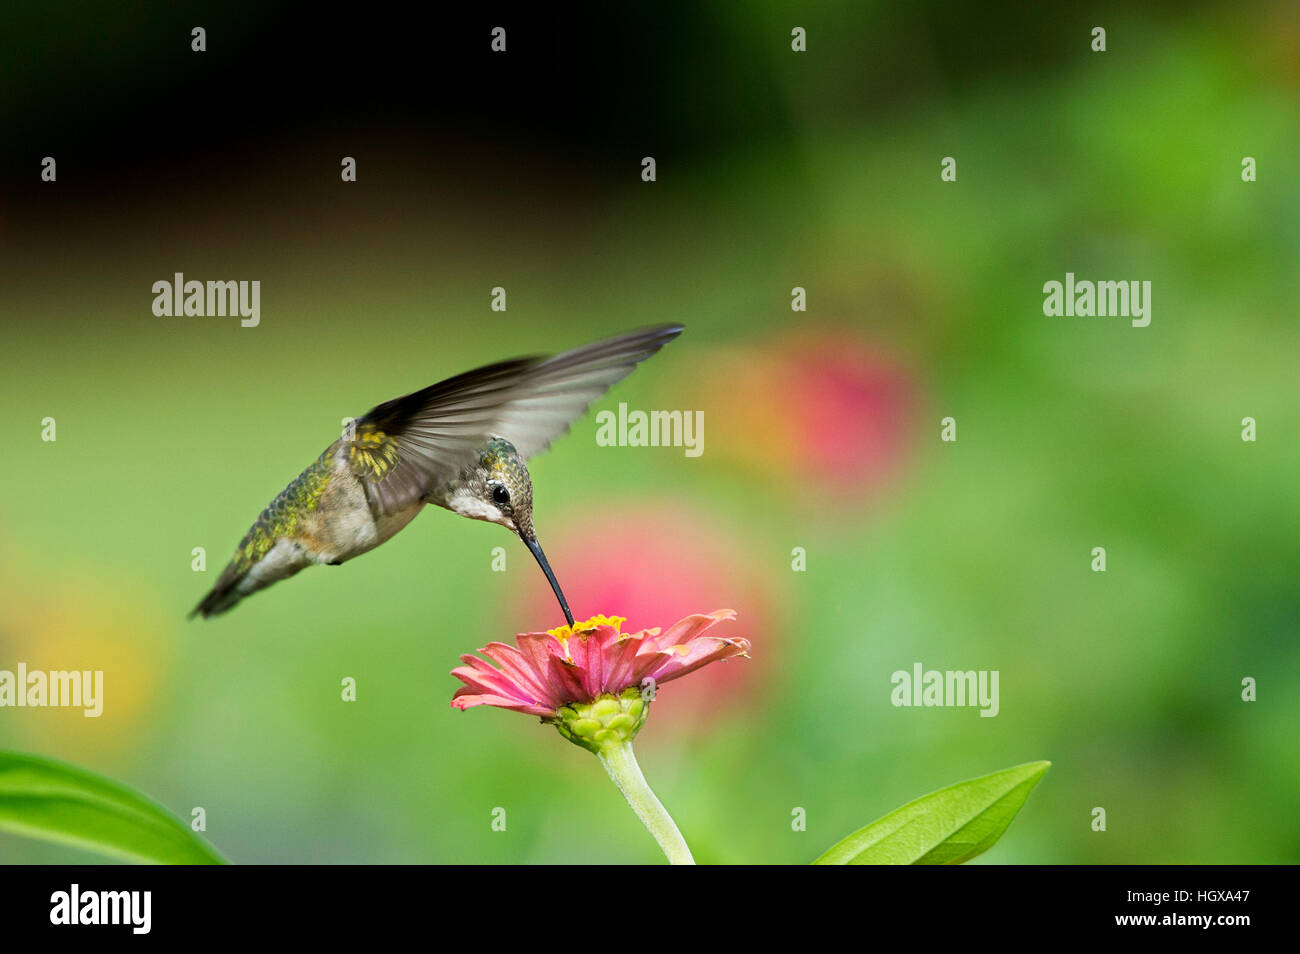 A female Ruby-throated Hummingbird feeds on a Zinnia flower in front of a smooth green background. Stock Photo